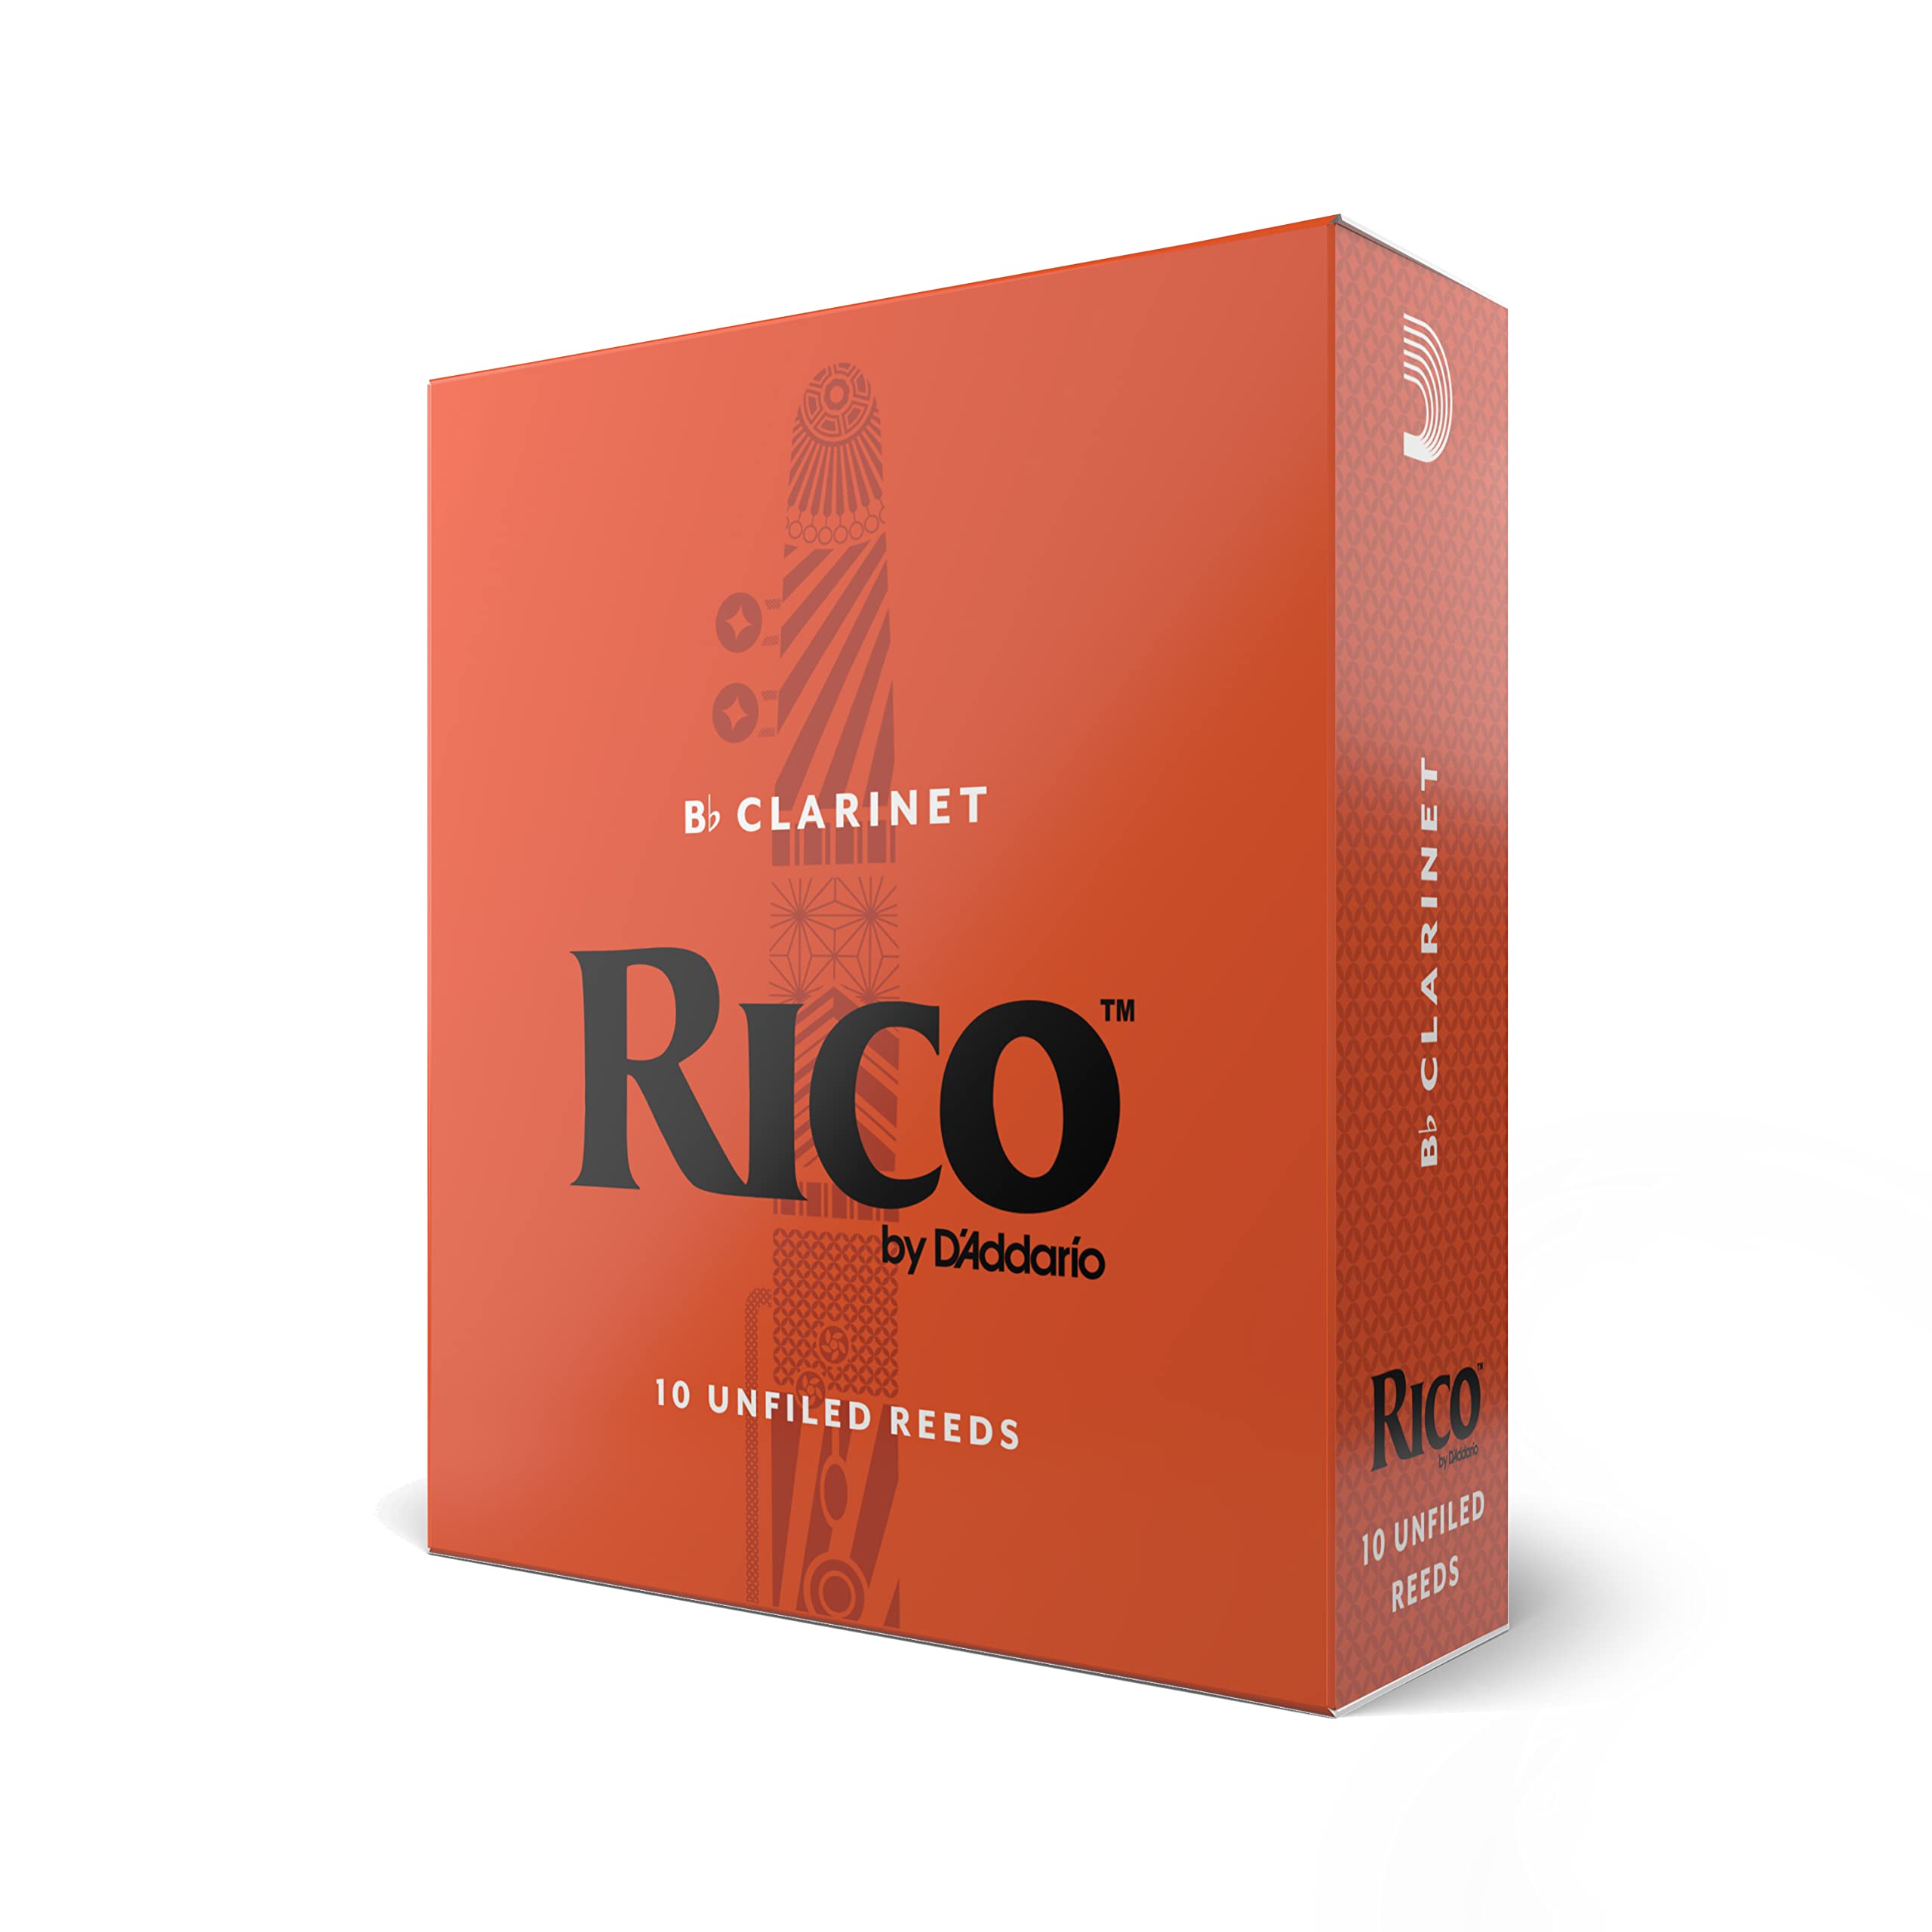 D’Addario Woodwinds Rico Bb Clarinet Reeds - Reeds for Clarinet - Thinner Vamp Cut & Unfiled for Ease of Play, Traditional Blank for Clear Sound